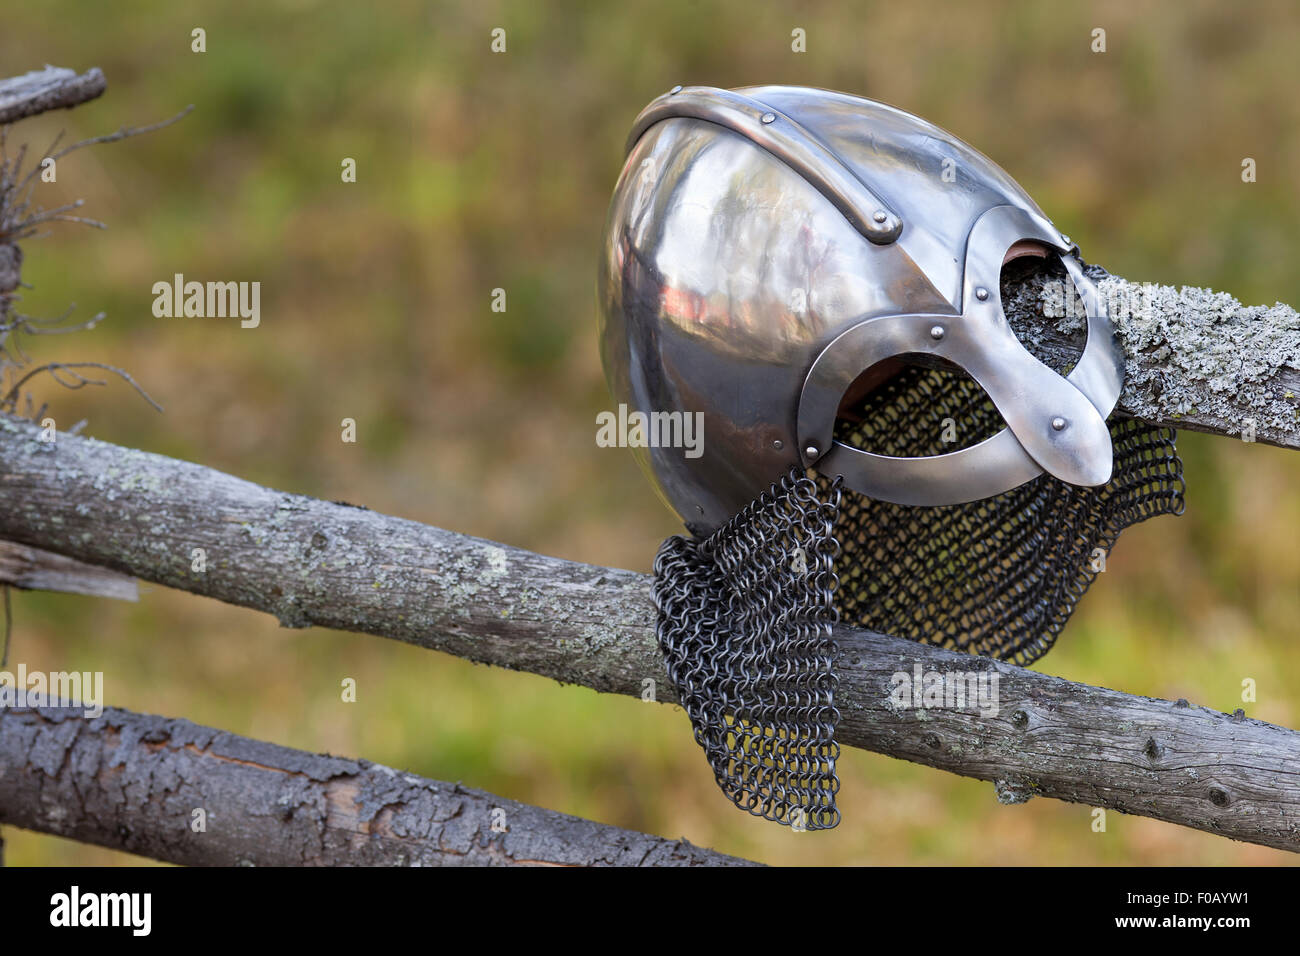 Steel Viking Knight helmet hangs on an old traditional wooden fence. Fuzzy background. Retro. Stock Photo